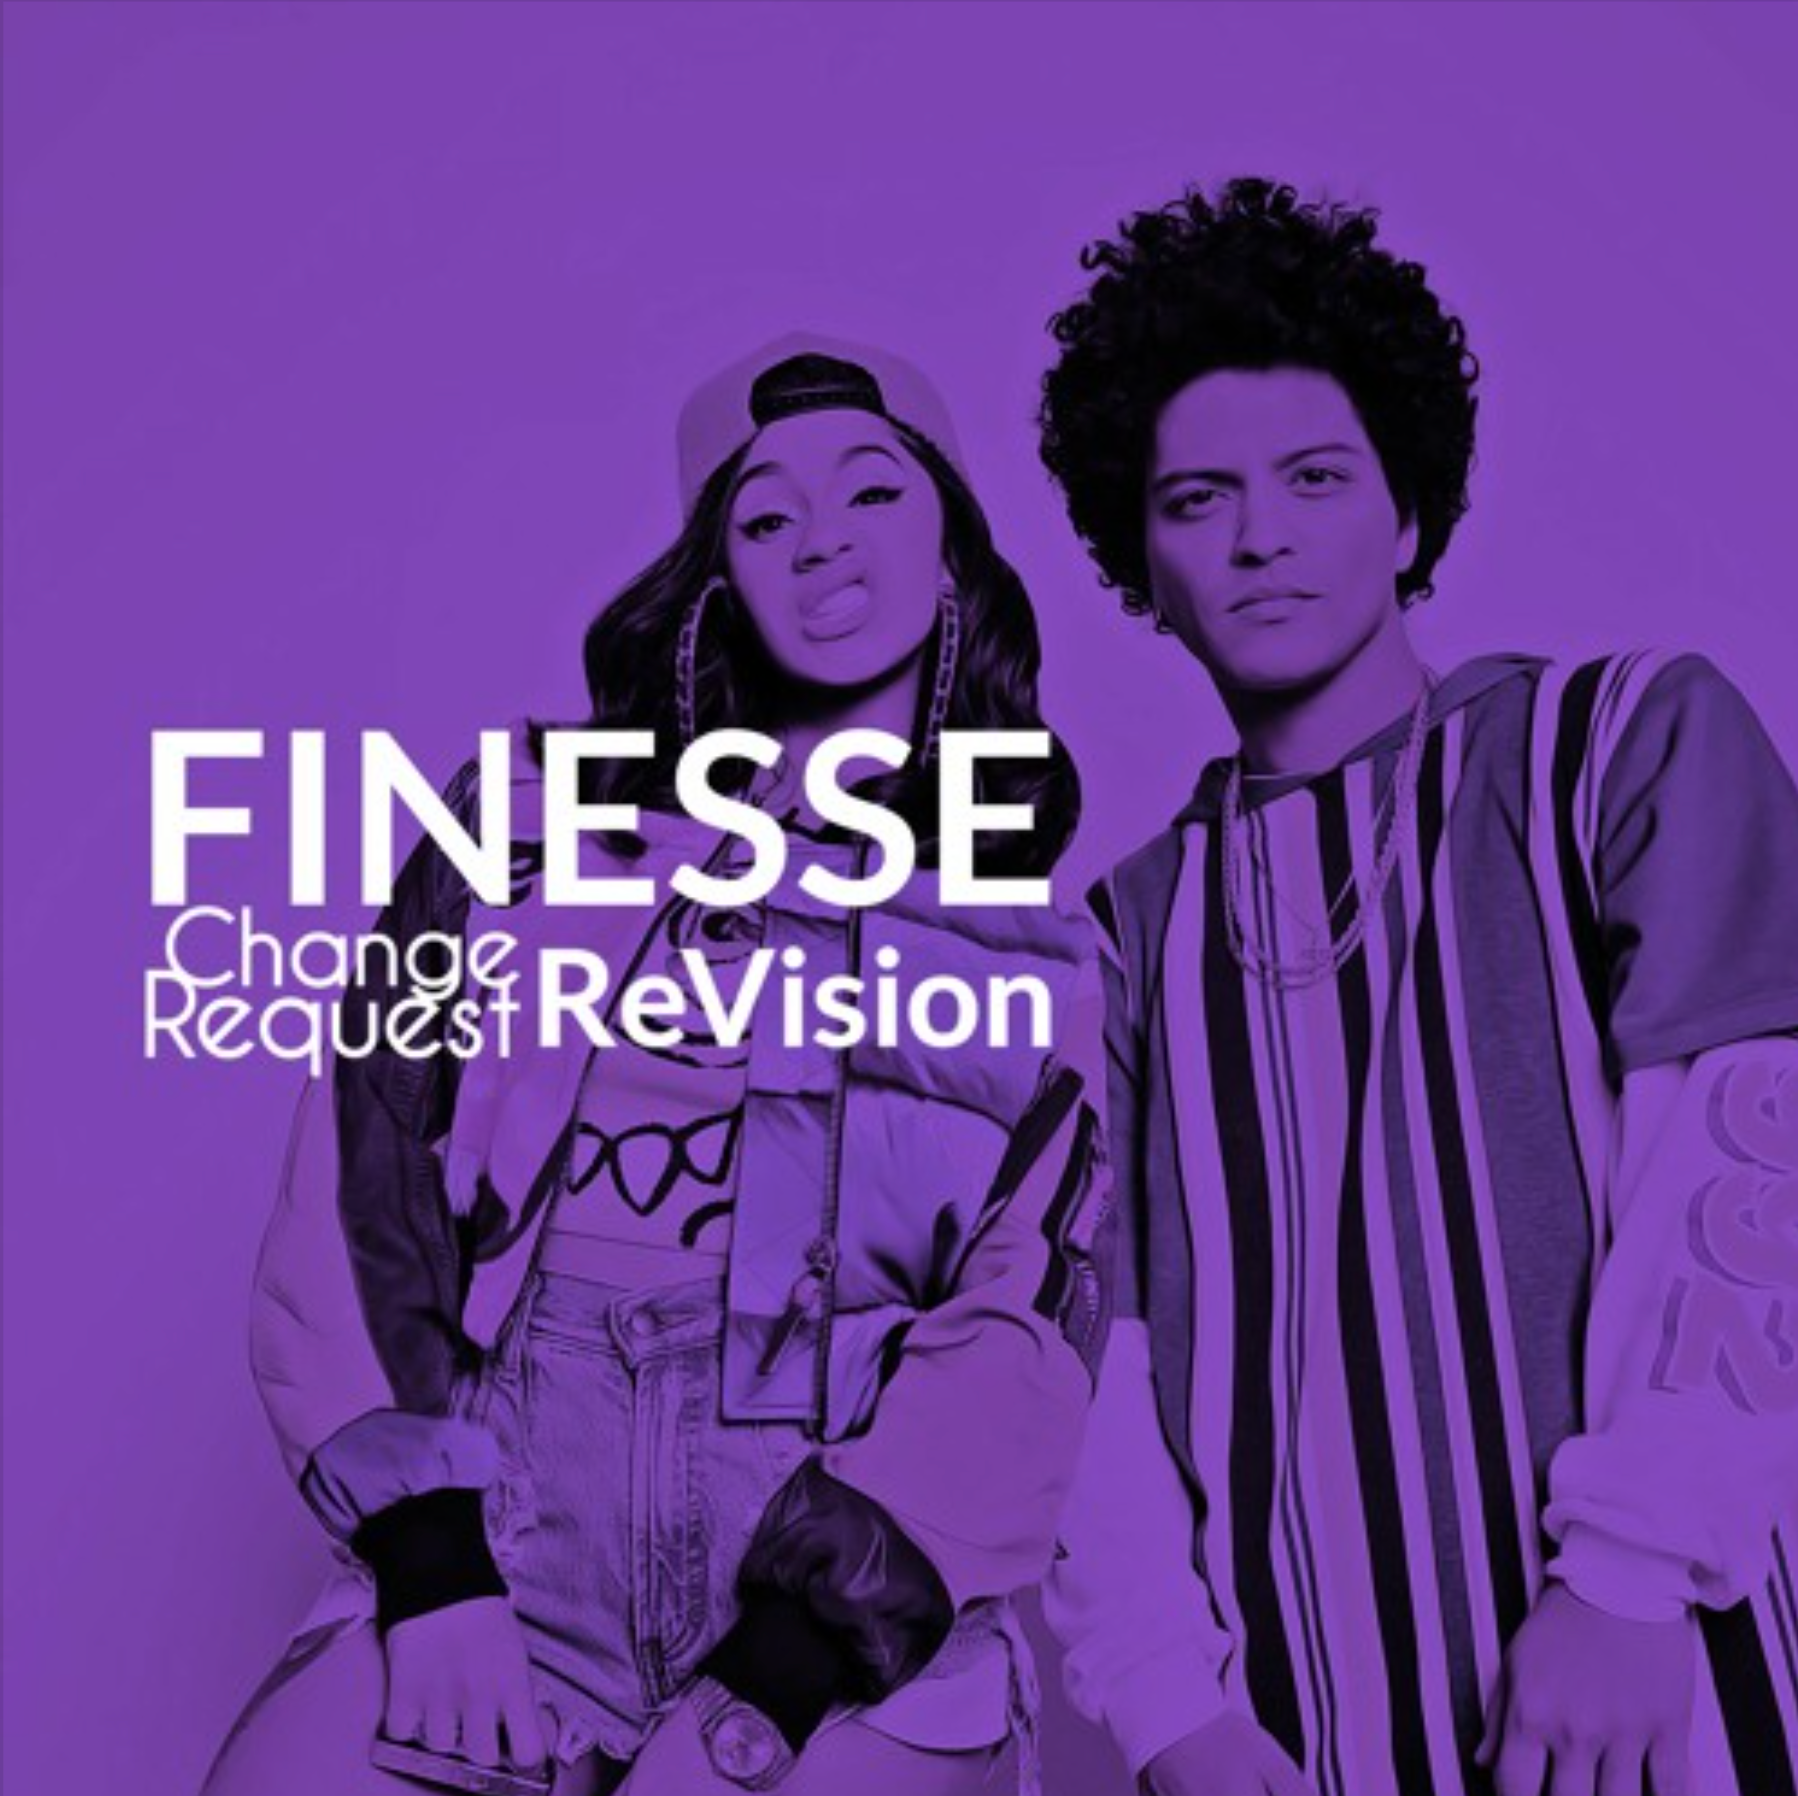 Finesse (Change Request ReVision)